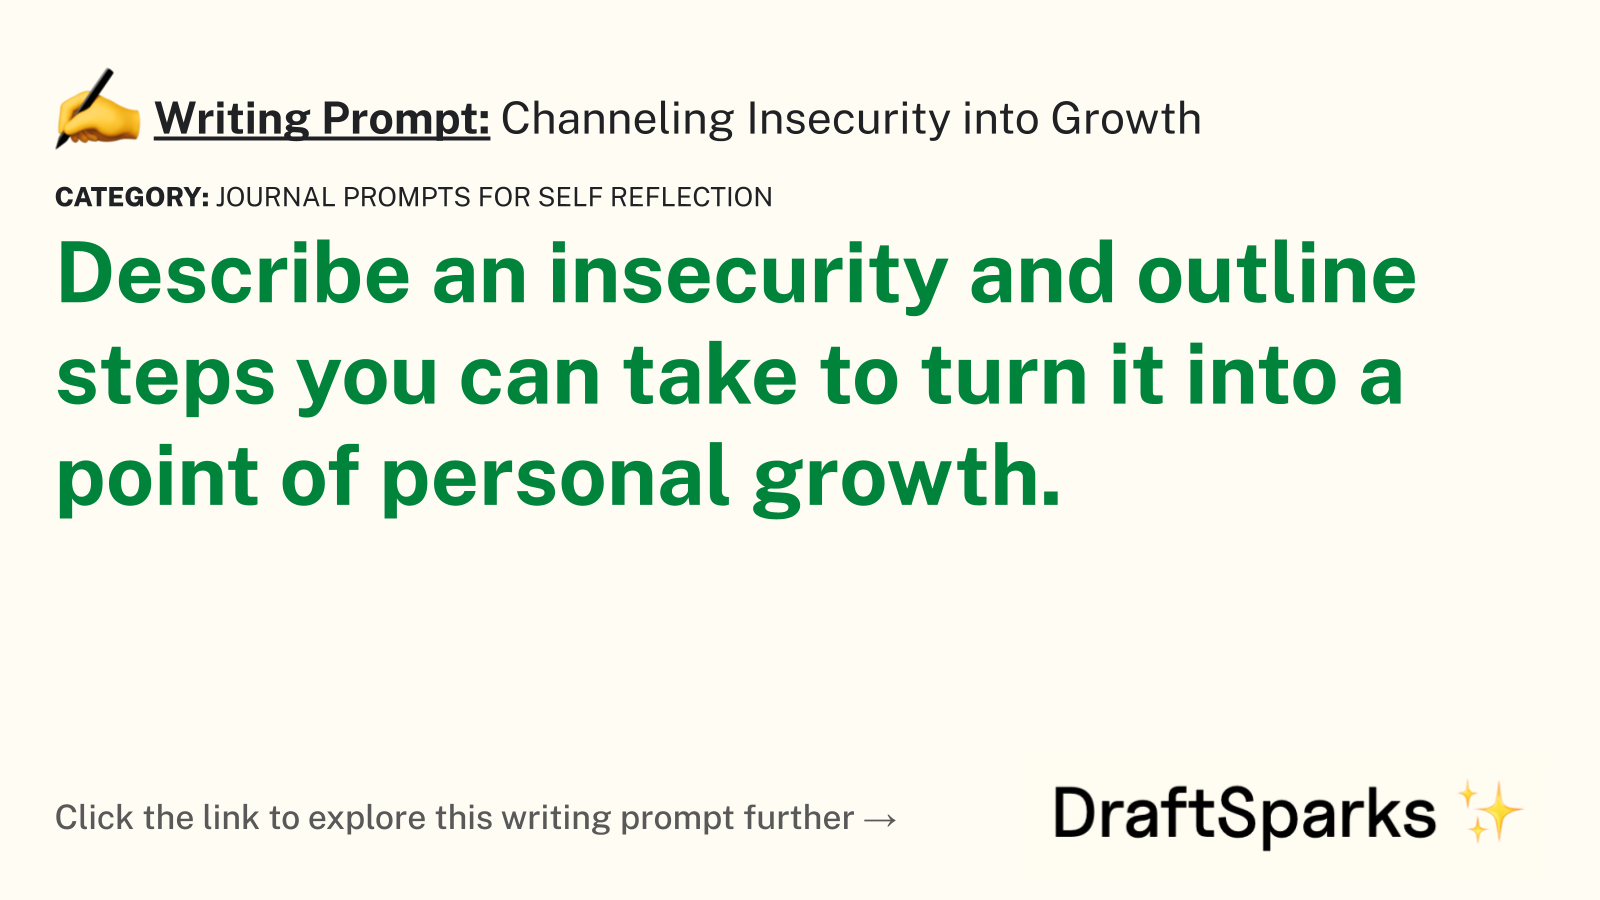 Channeling Insecurity into Growth